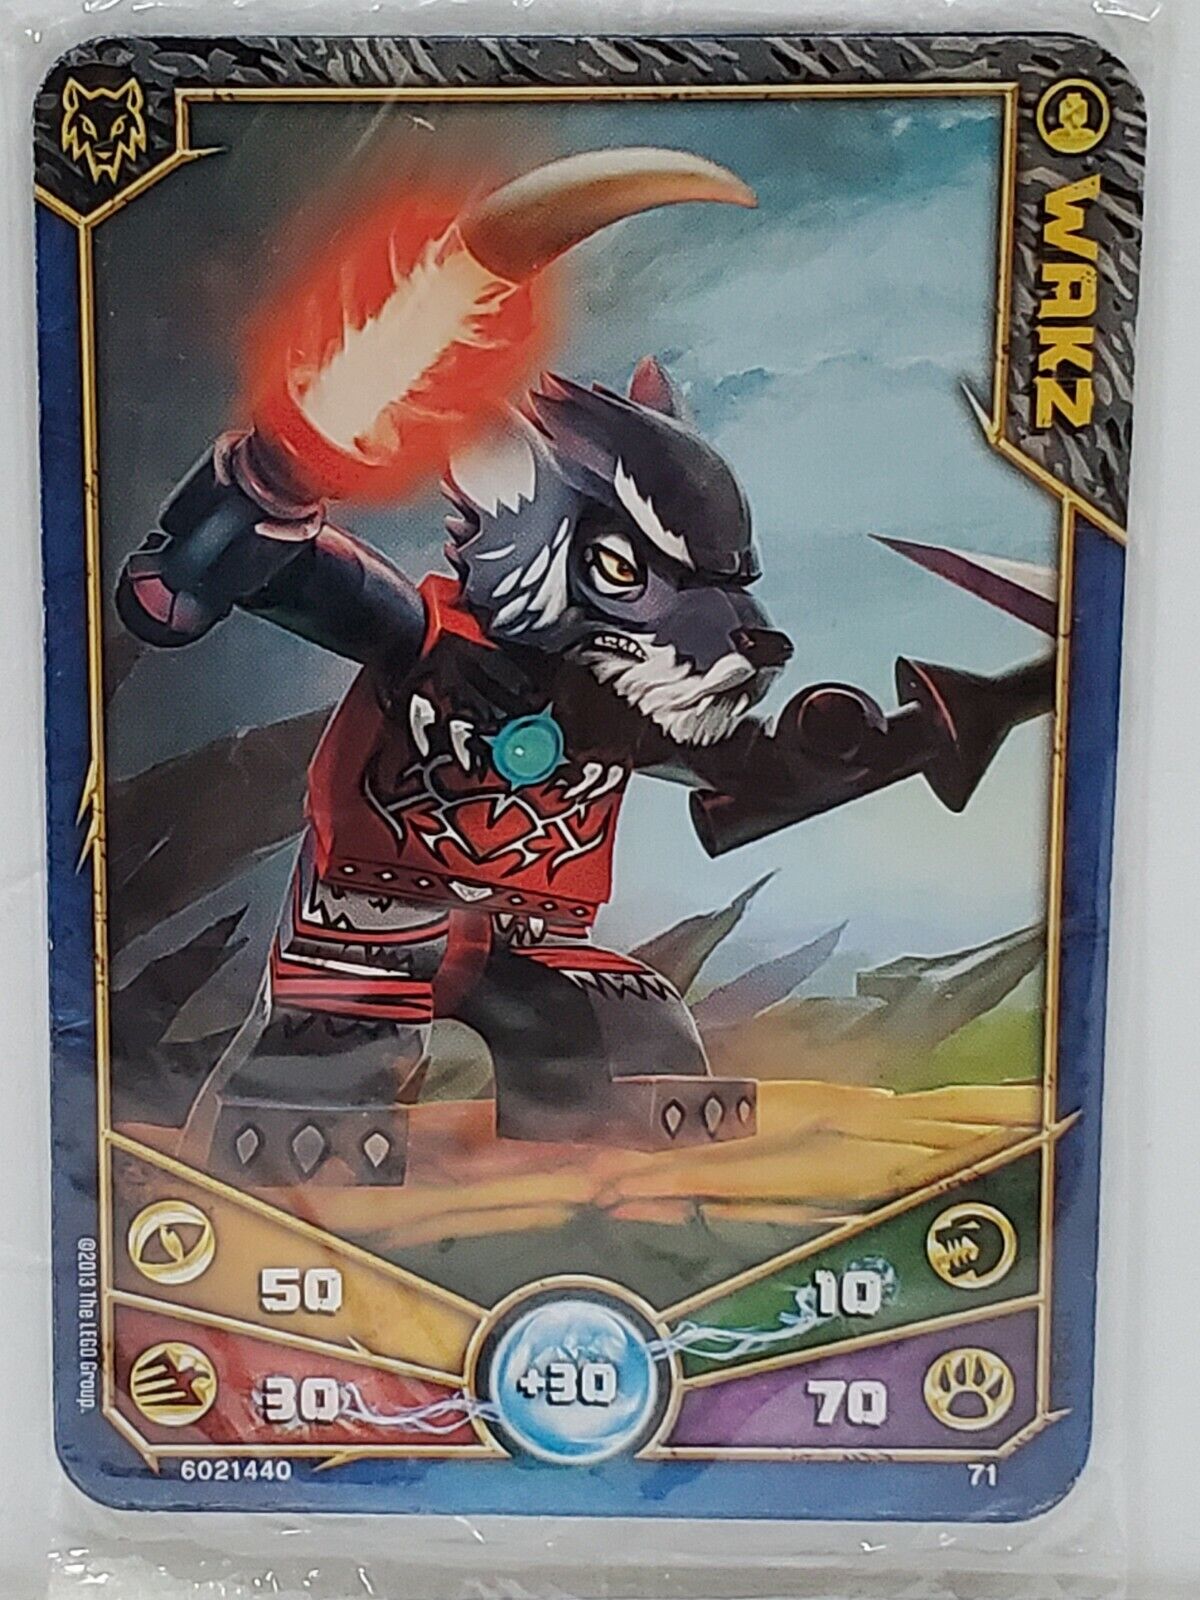 New Lego Legend of Chima - Wakz Trading Cards pack (5 cards) from 70113  673419190121 | eBay